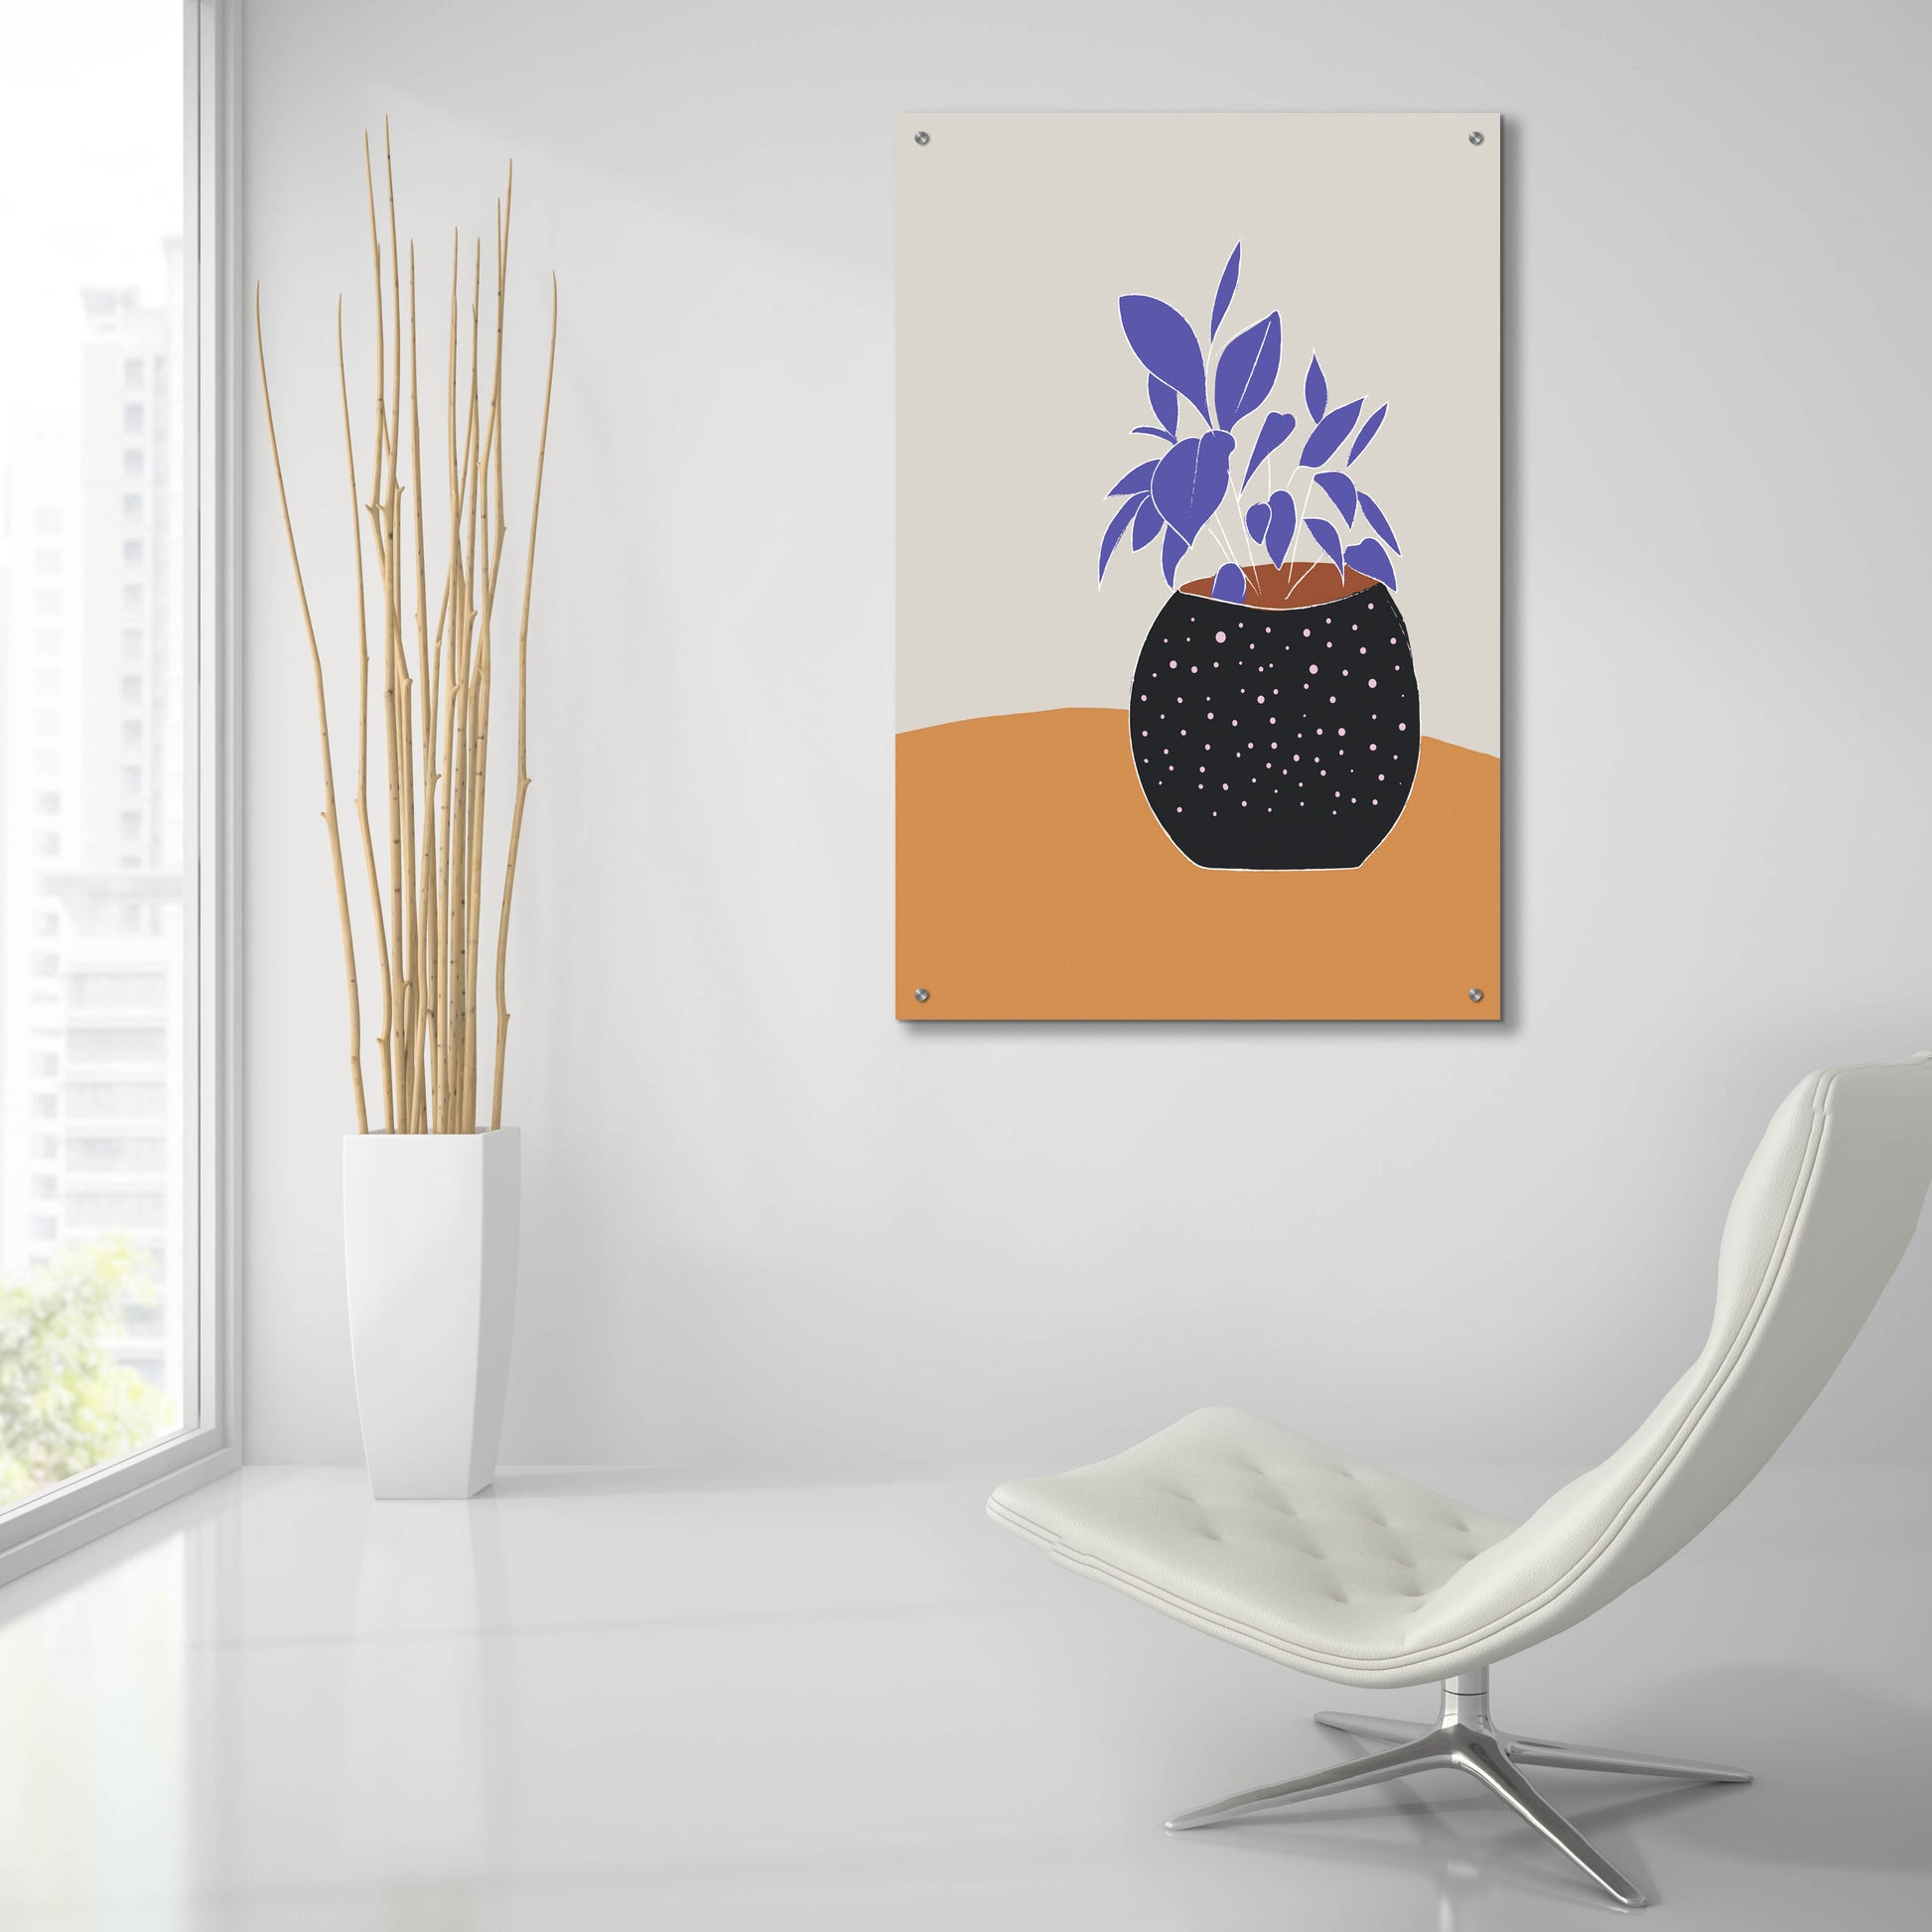 Epic Art 'Leaves Plant On A Pot Hot And Cold Trend' by Sabrina Balbuena, Acrylic Glass Wall Art,24x36